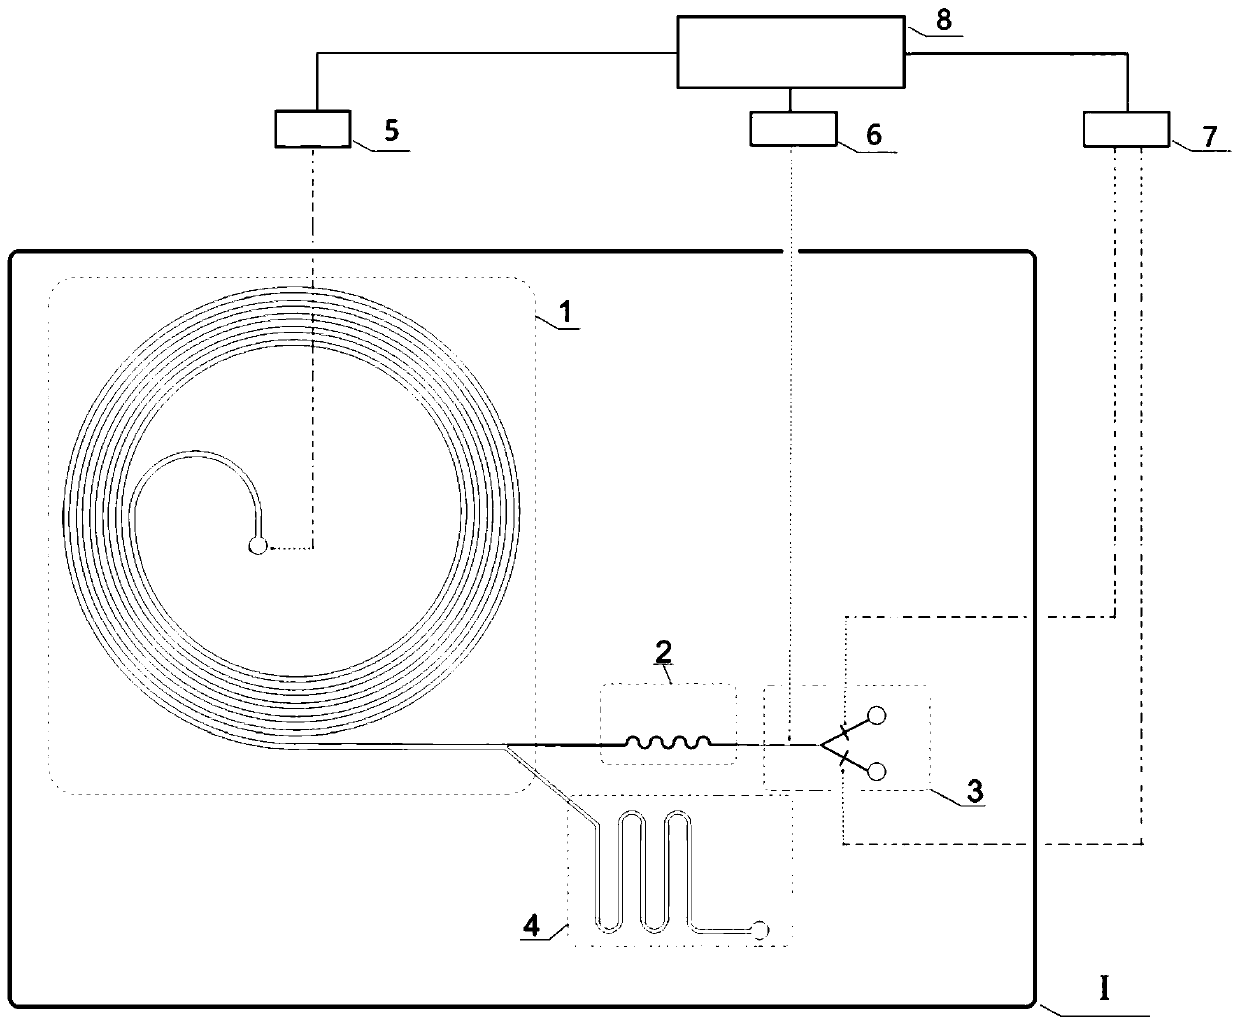 Microfluid control system for separating, focusing and sorting of rare cells and application